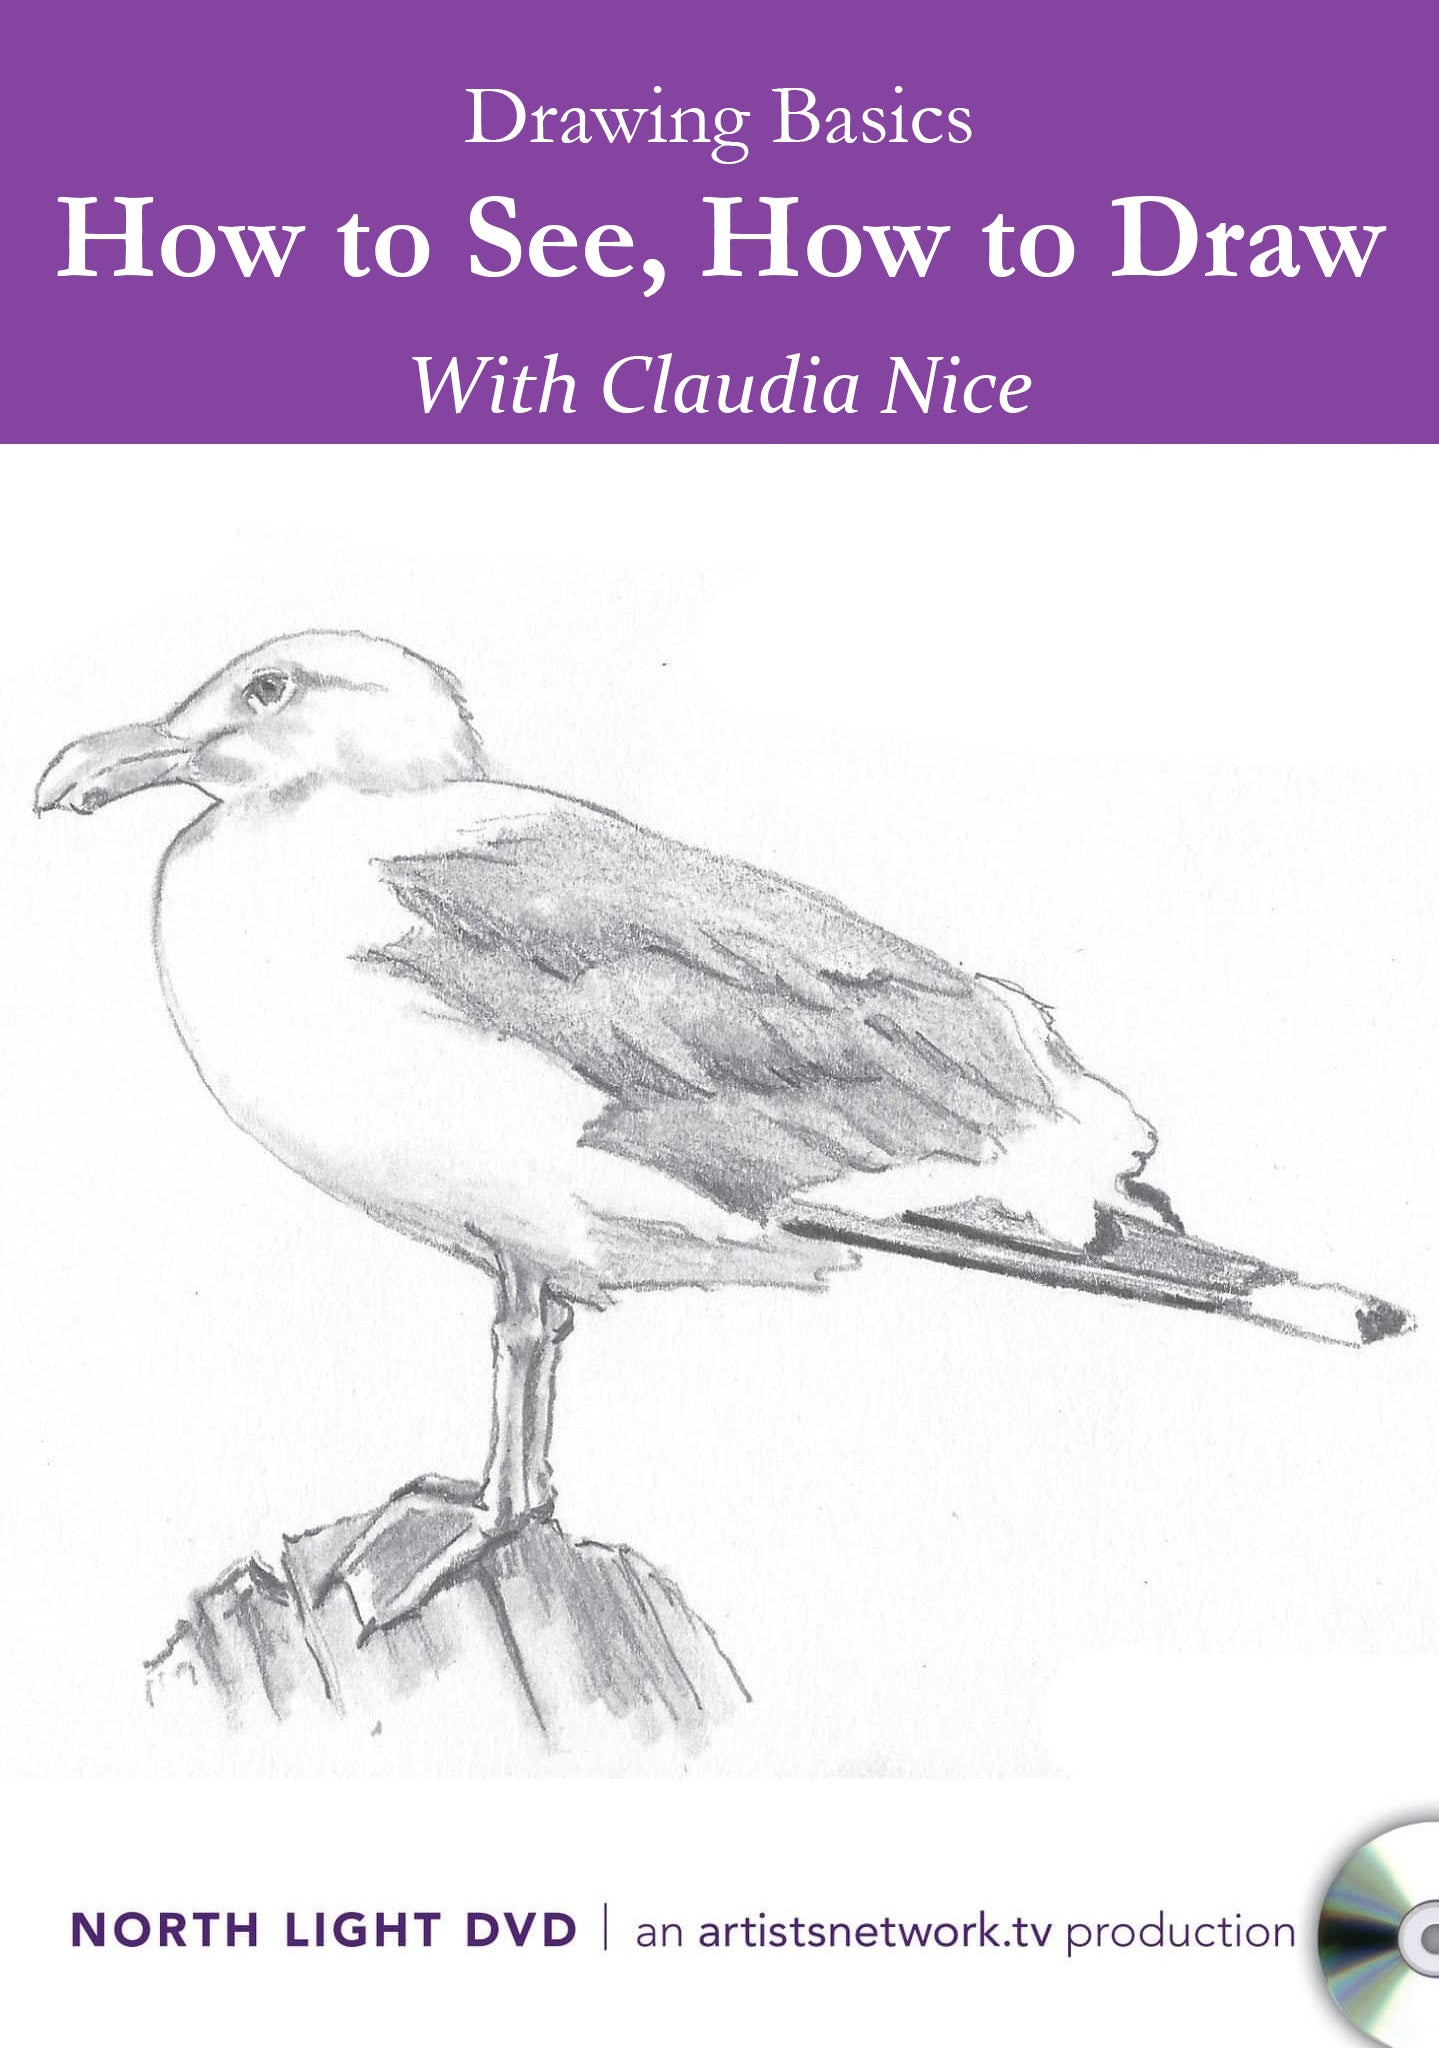 Claudia Nice: Drawing Basics - How to See, How to Draw